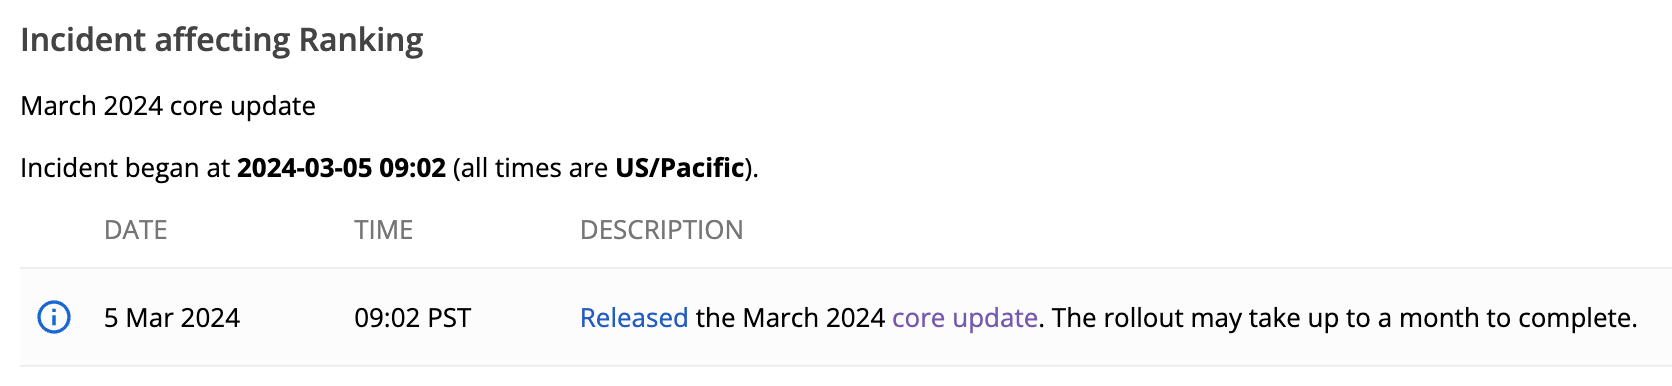 google search dashboard showing launch date of march 2024 core update